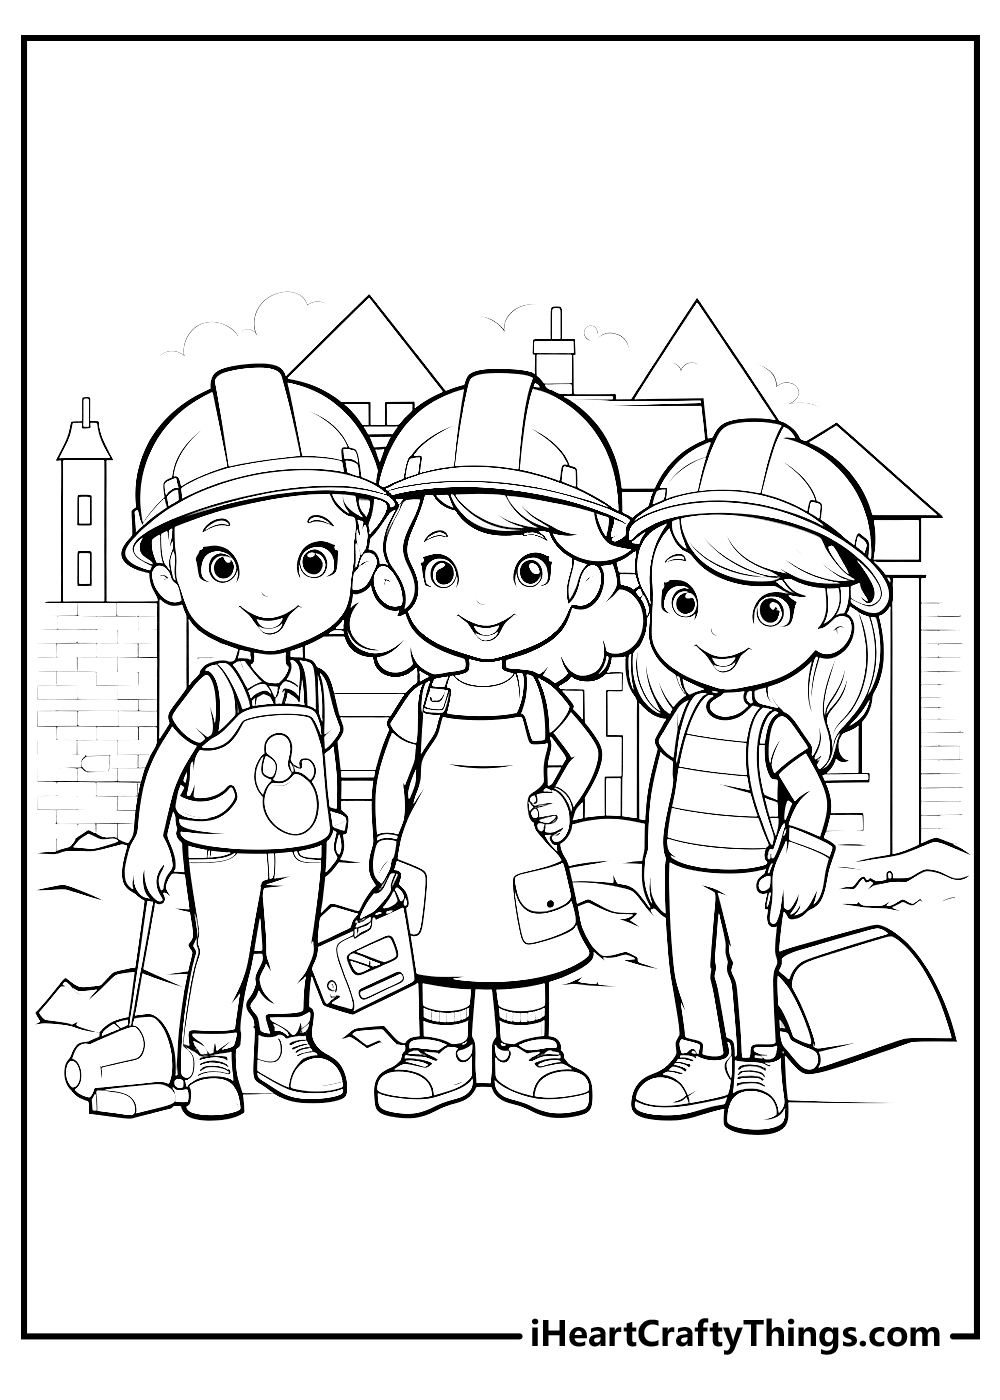 Free Printable Construction Coloring Pages for a Party  A Visual  Merriment: Kids Crafts, Adult DIYs, Parties, Planning + Home Decor